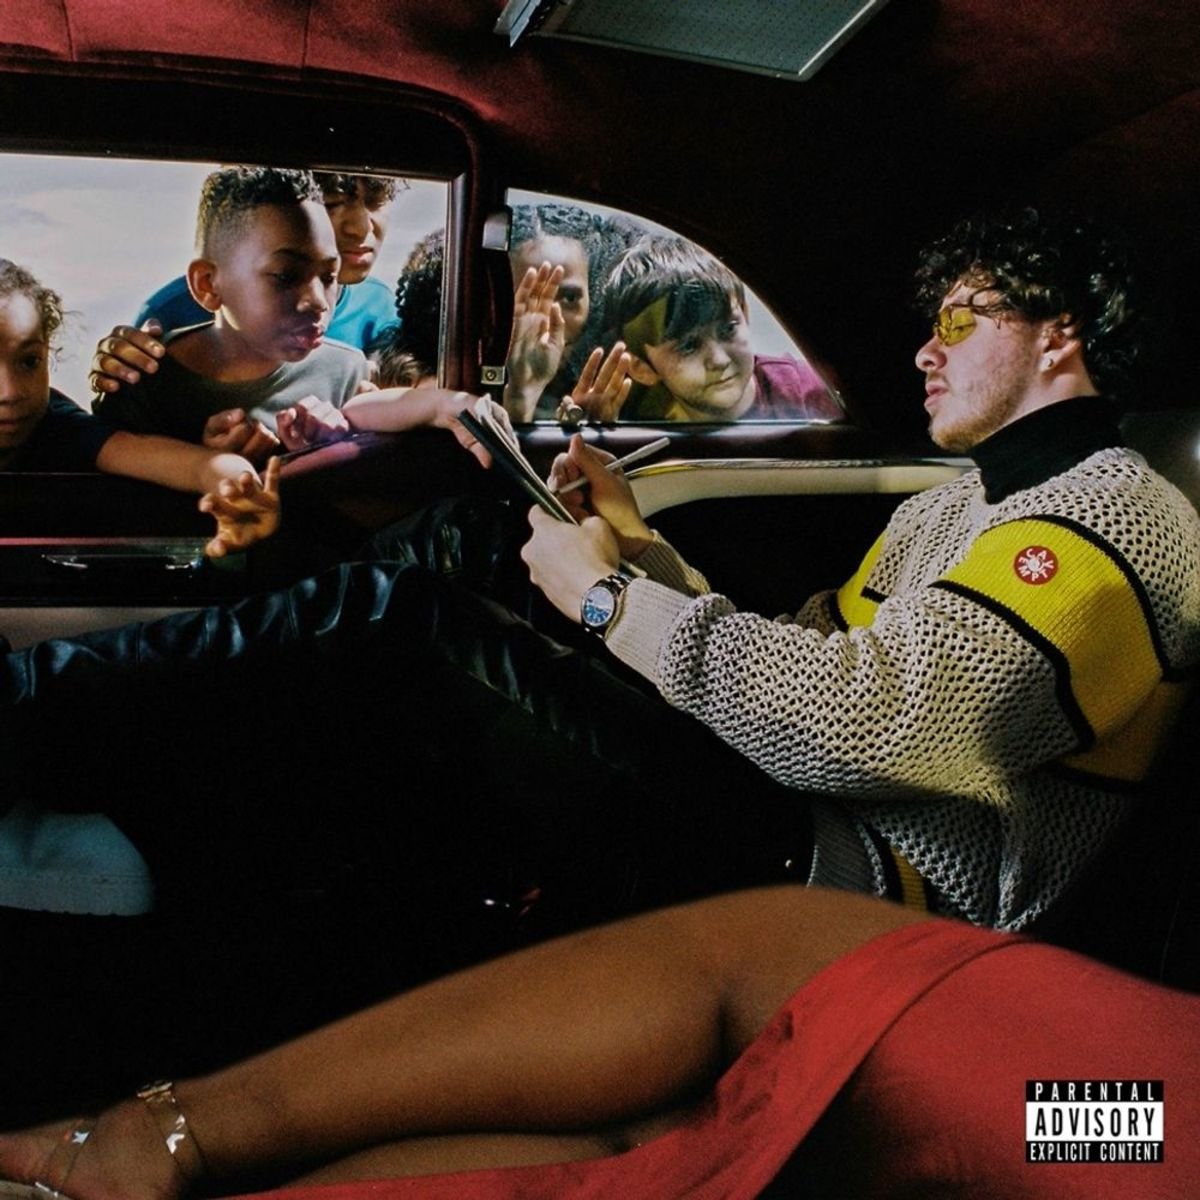 Listen to Jack Harlow’s Debut Album ‘That’s What They All Say’ f/ Lil Wayne, Lil Baby, Bryson Tiller, and More